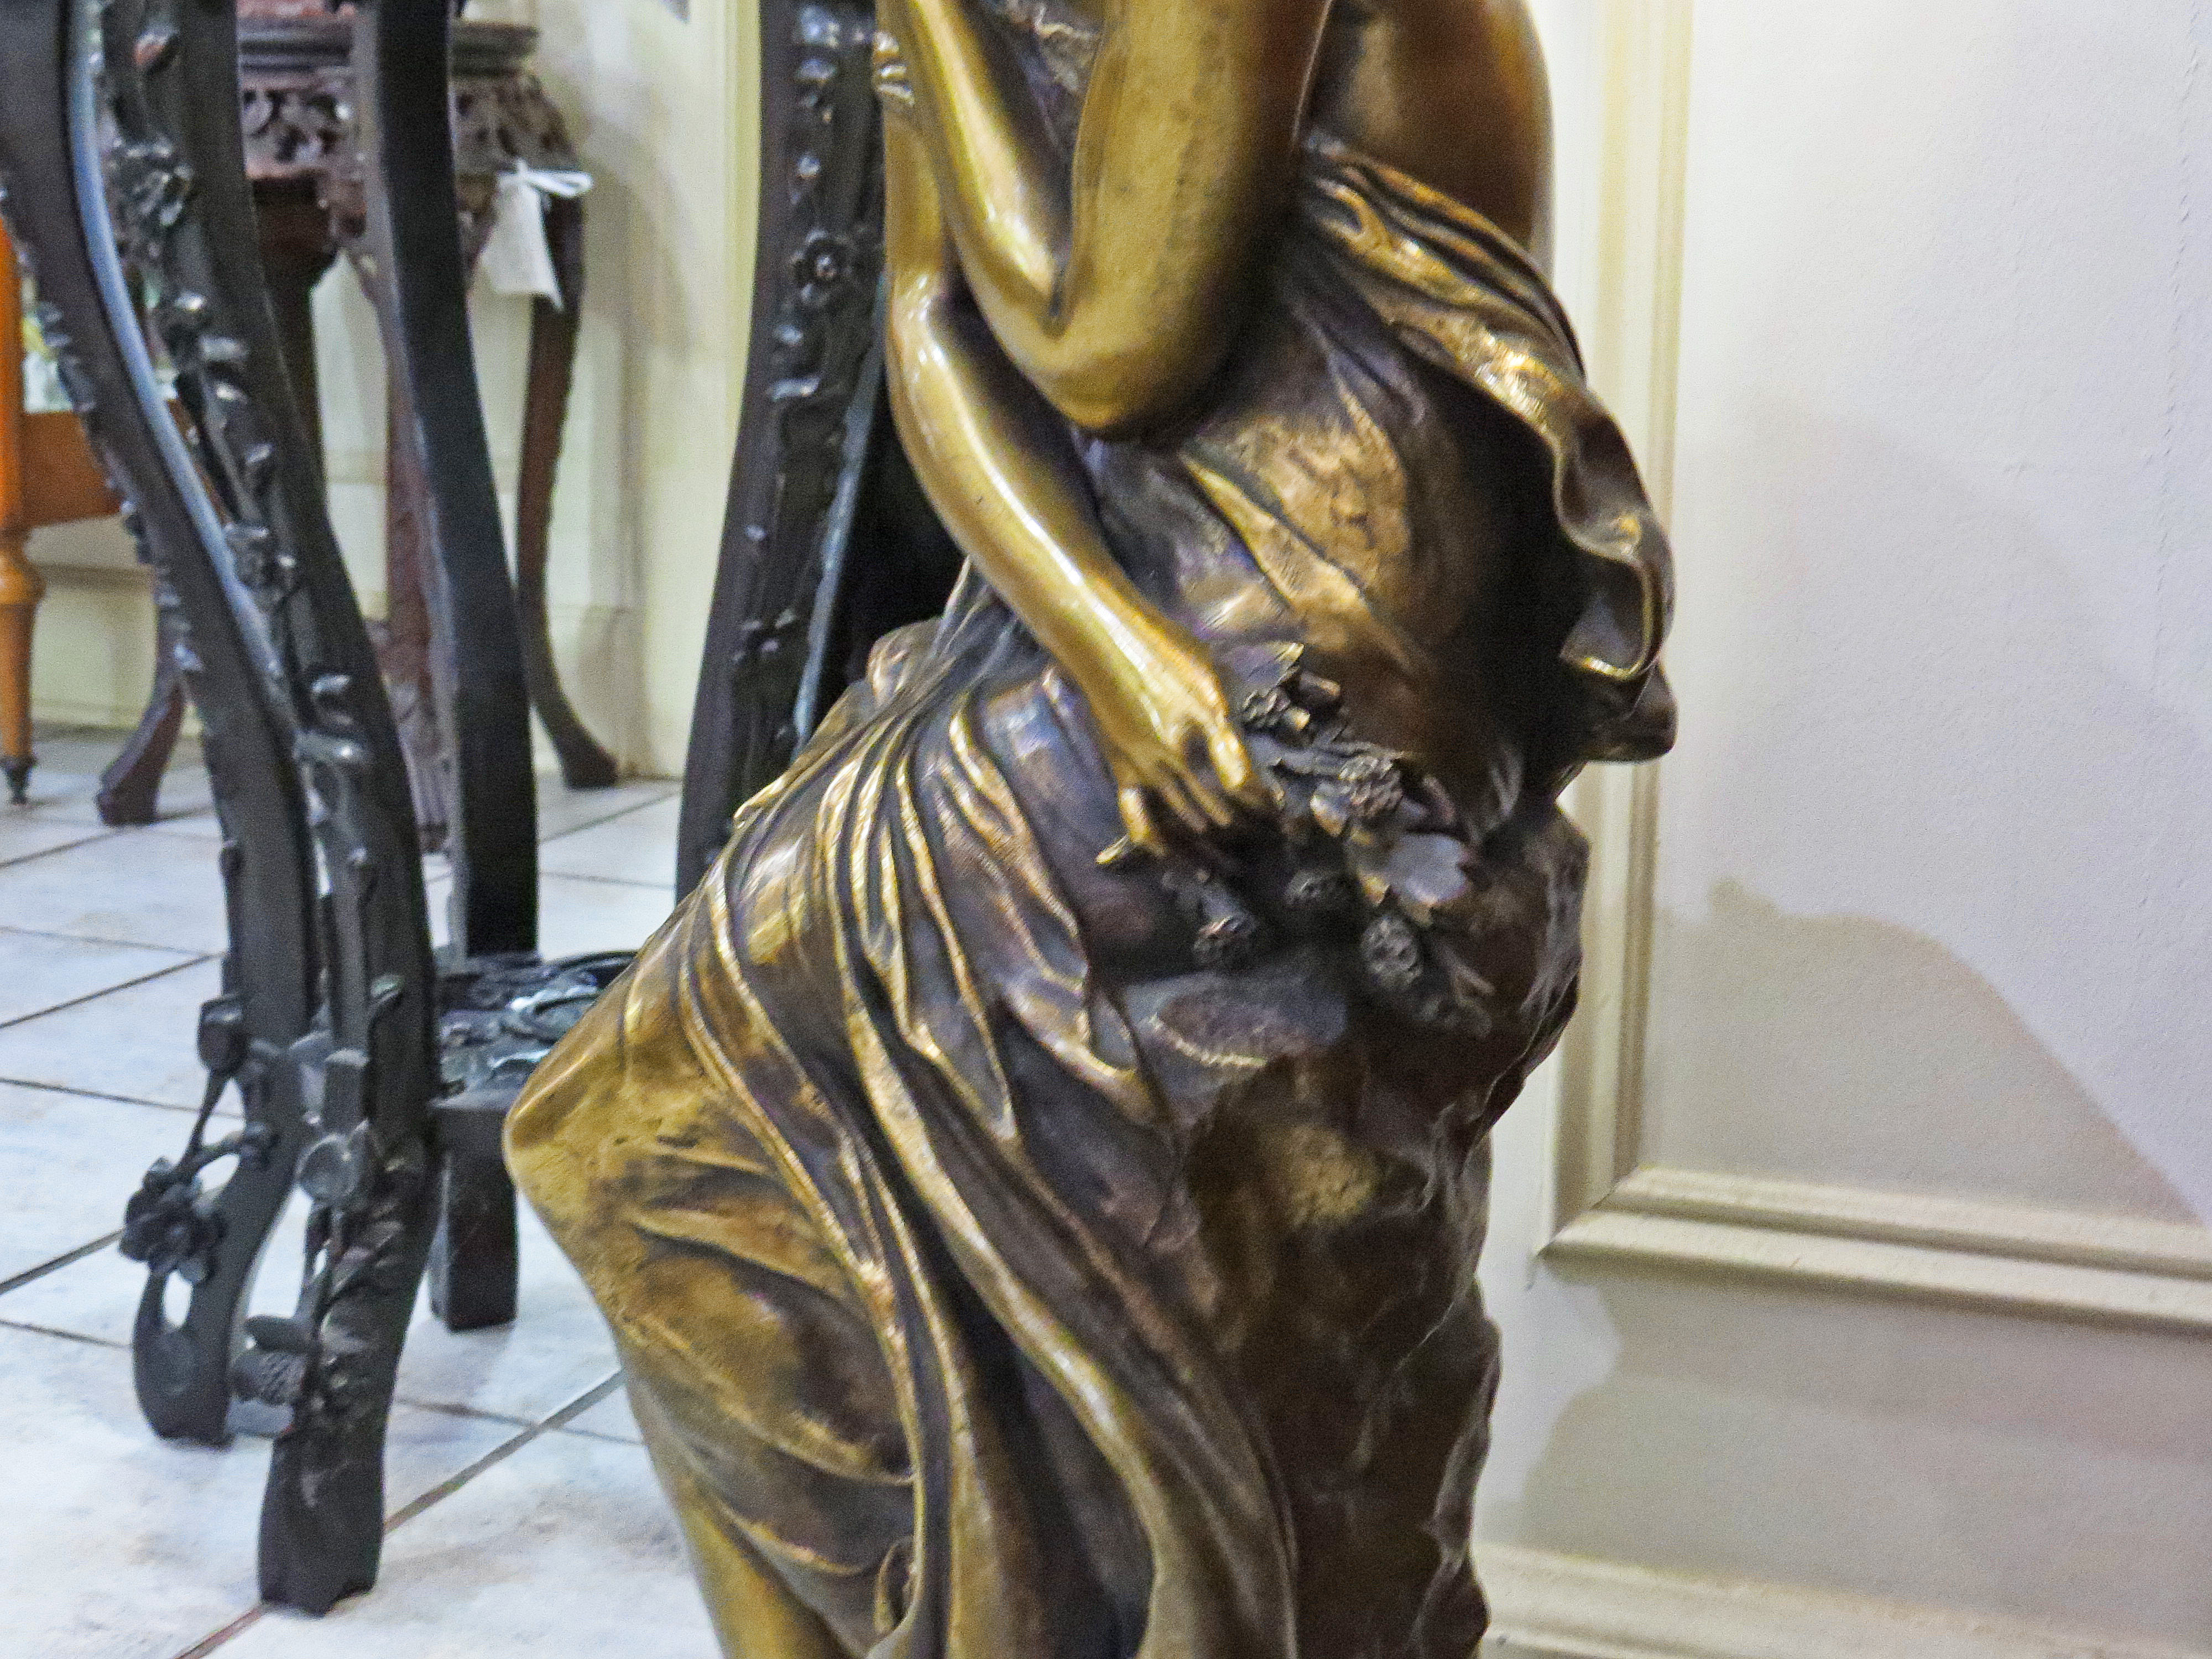 French Bronze Sculpture of Female Figure on a Rock Formation; Signed Moreau (Auguste Moreau)